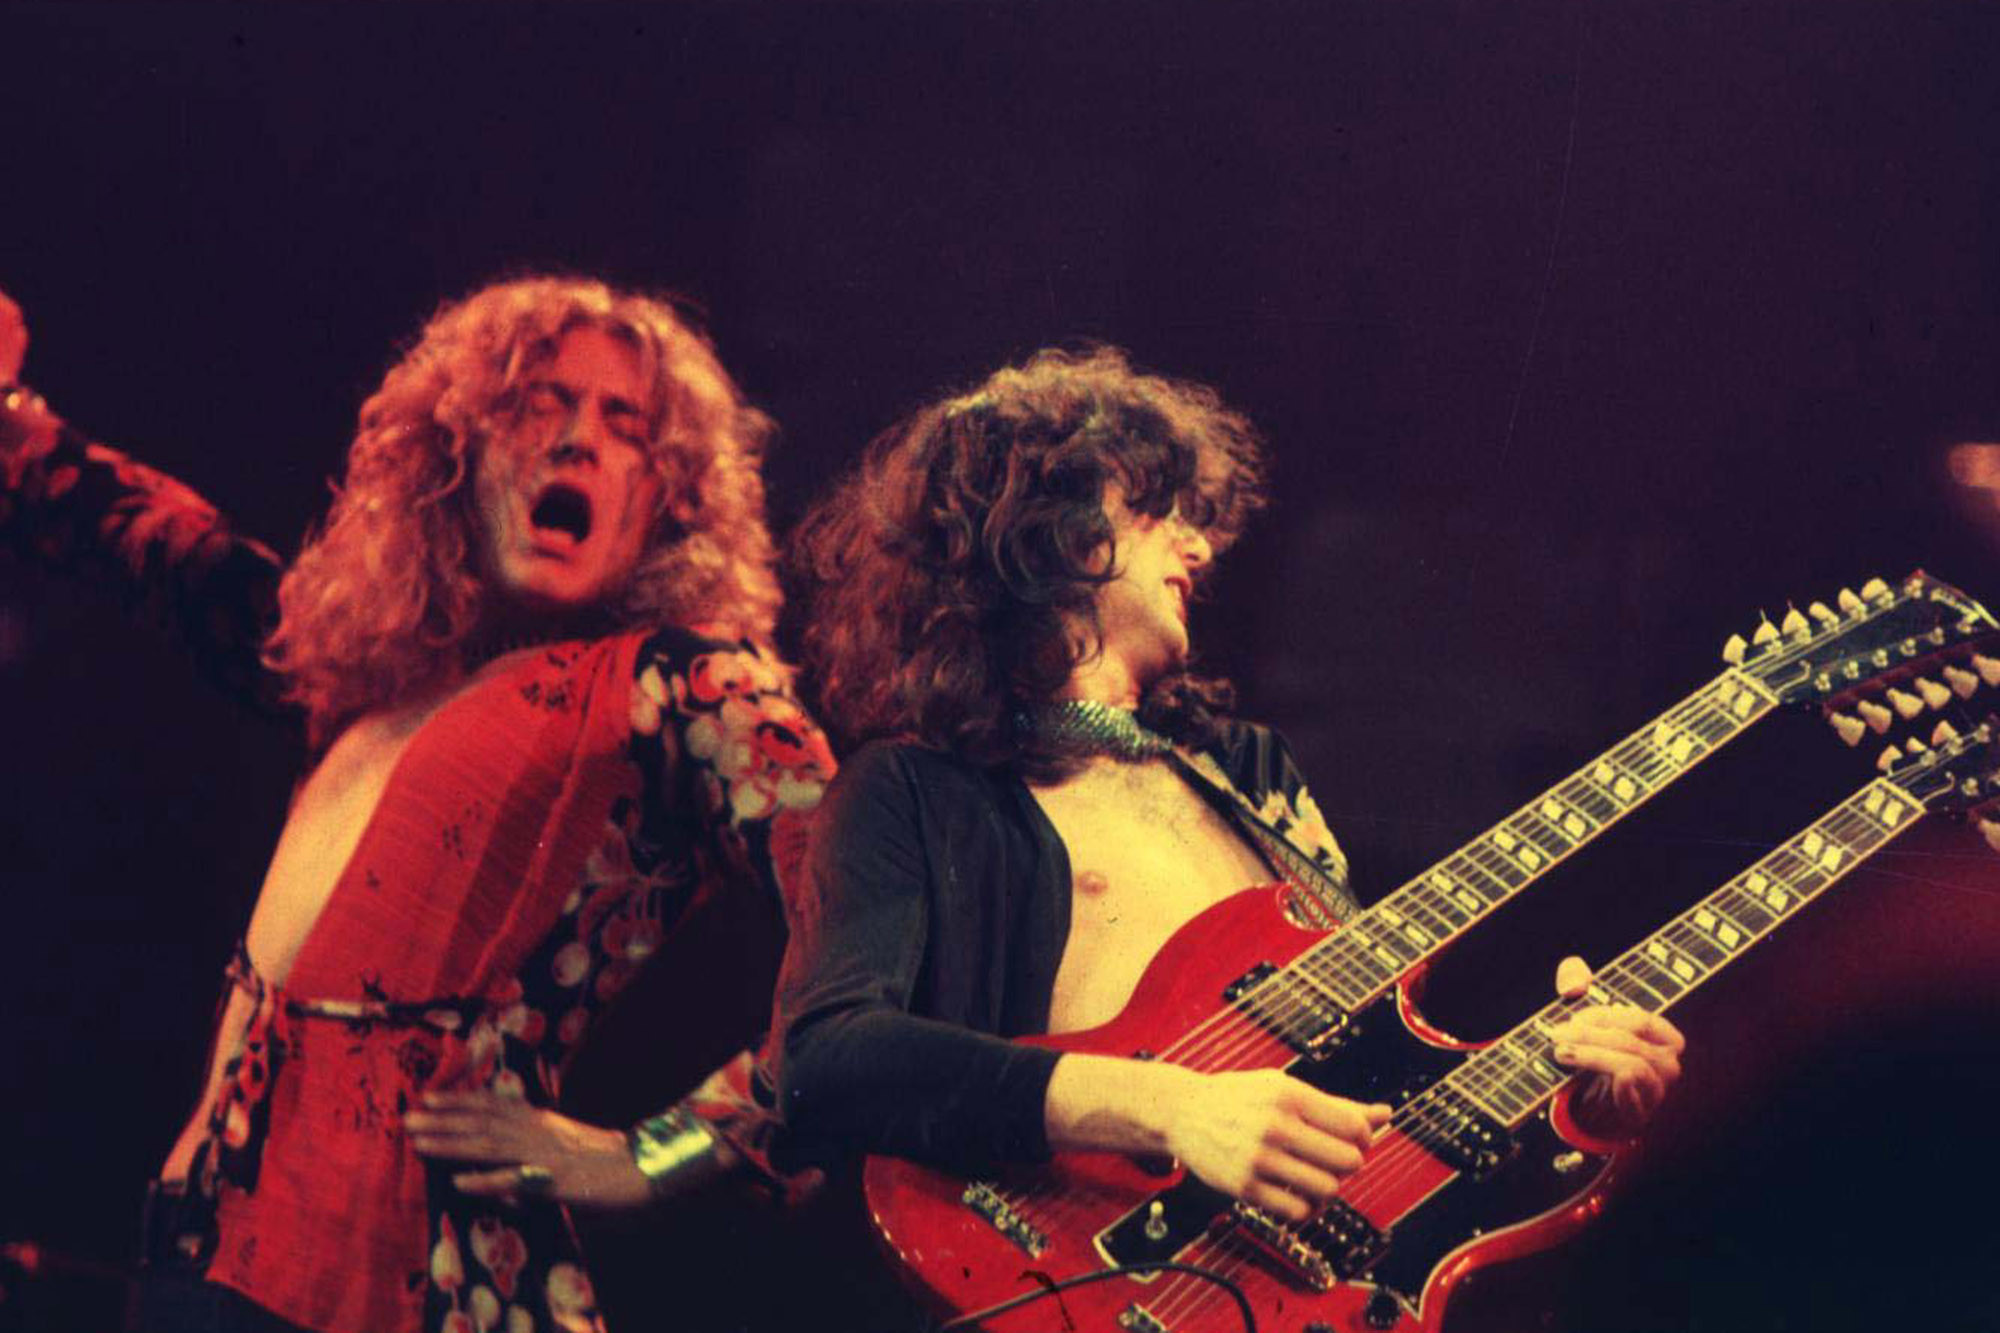 2000x1333 robert plant and jimmy page live wallpaper